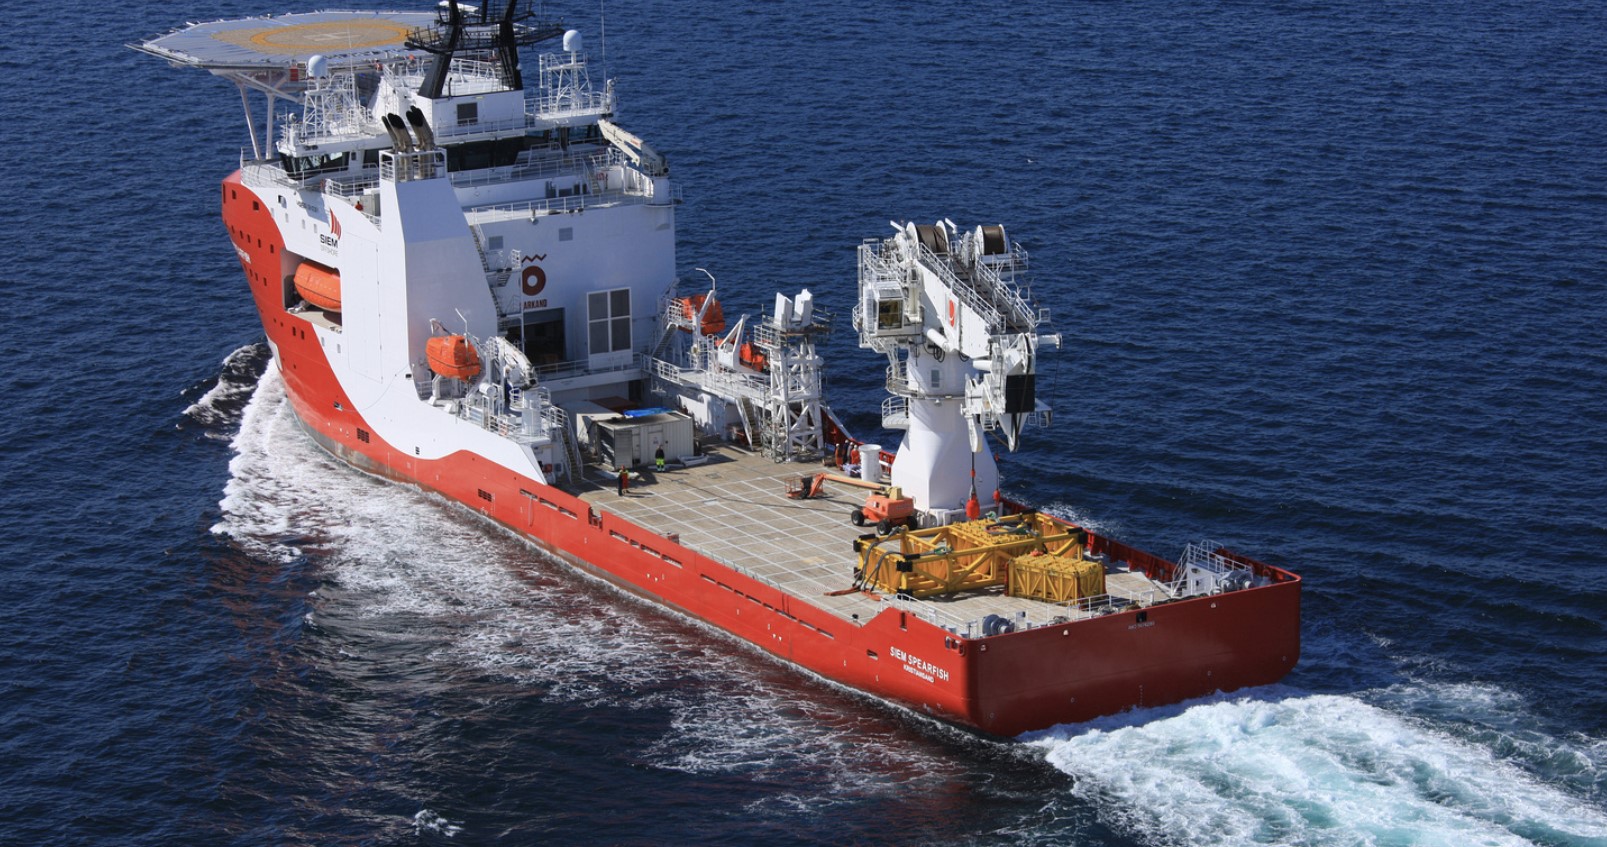 Siem vessel to work for PXGEO after completing class renewal